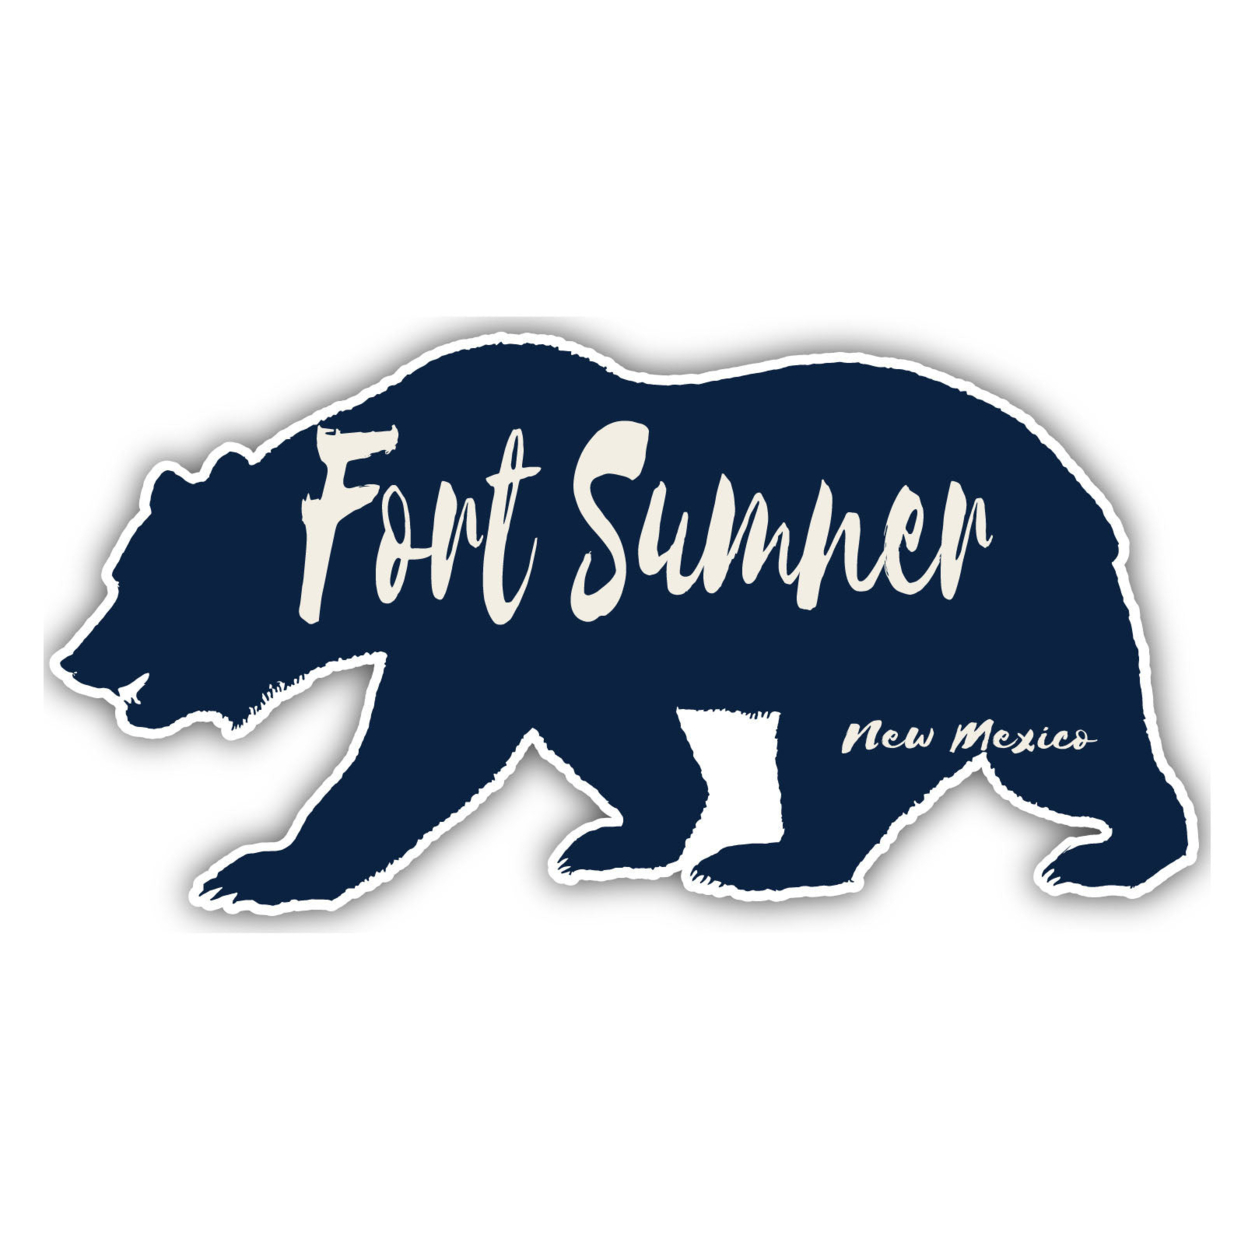 Fort Sumner New Mexico Souvenir Decorative Stickers (Choose Theme And Size) - Single Unit, 2-Inch, Bear